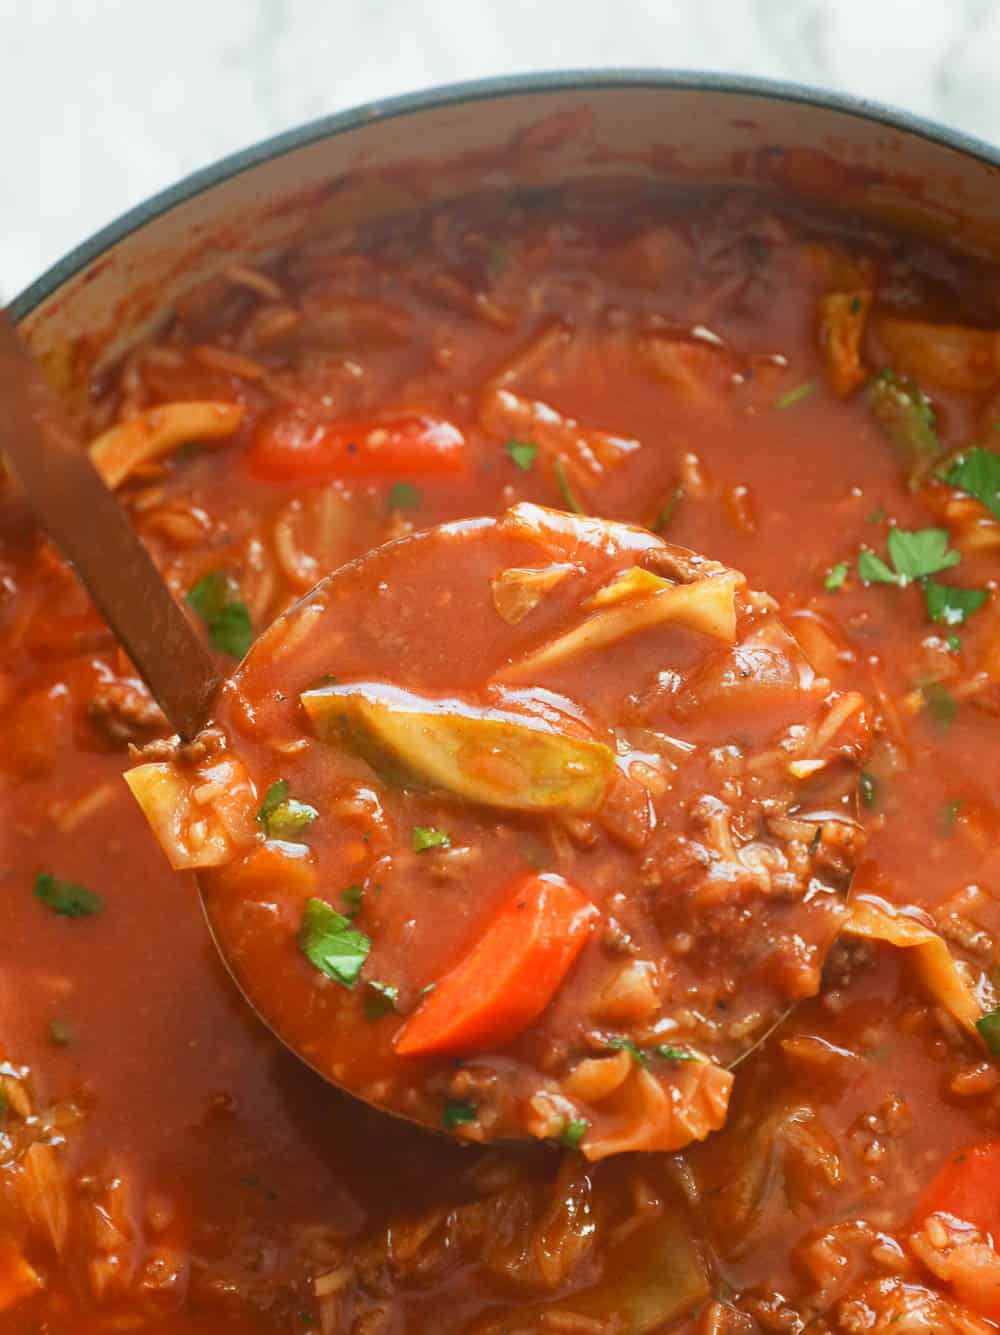 Scrumptious Stuffed Cabbage Roll Soup (Plus VIDEO) - Immaculate Bites